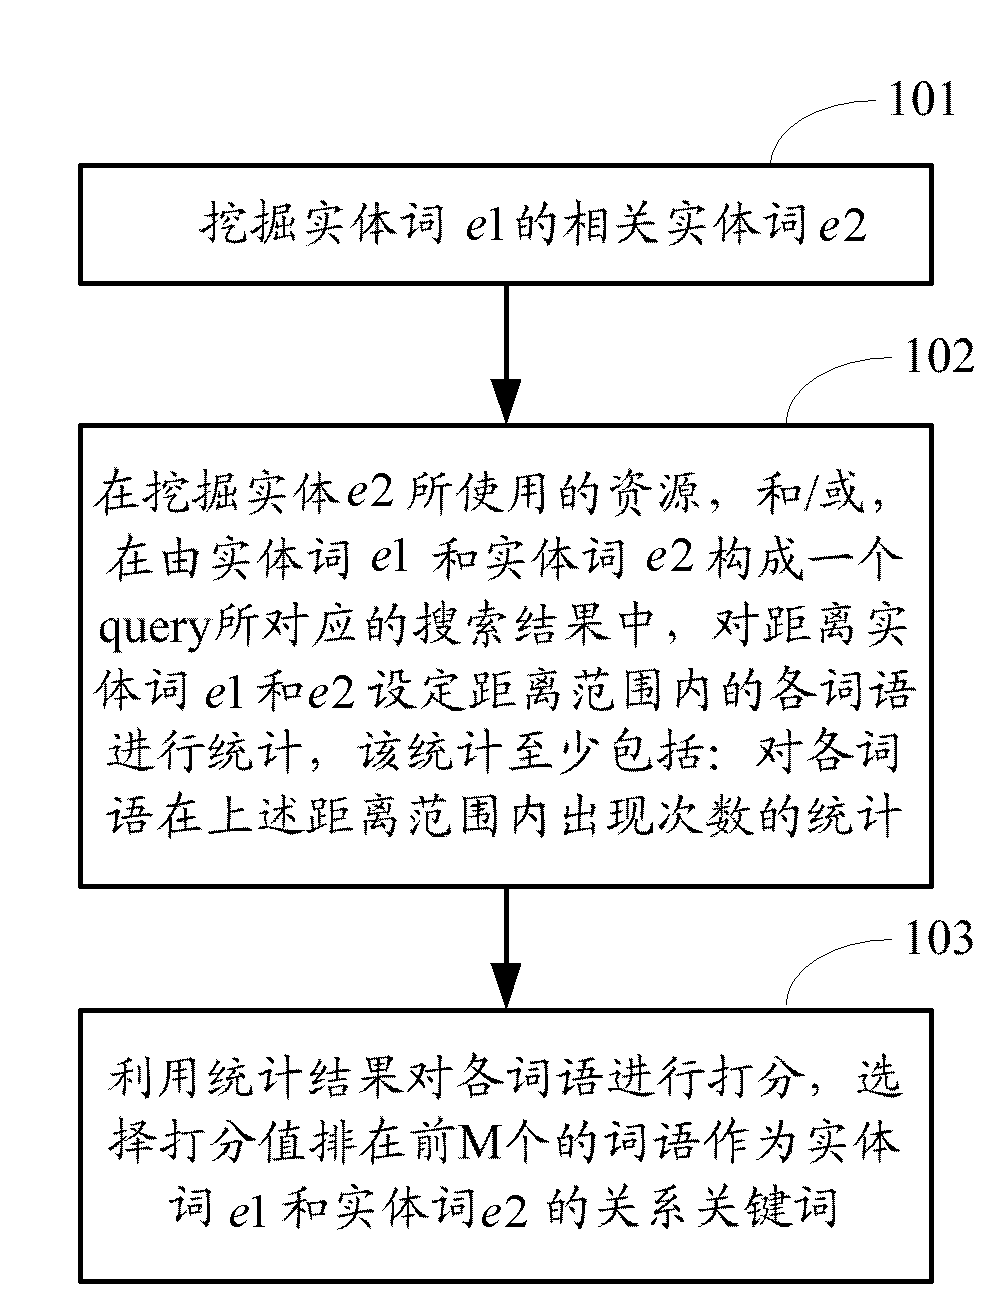 Method and device for digging relation keyword of relevant entity word and application thereof